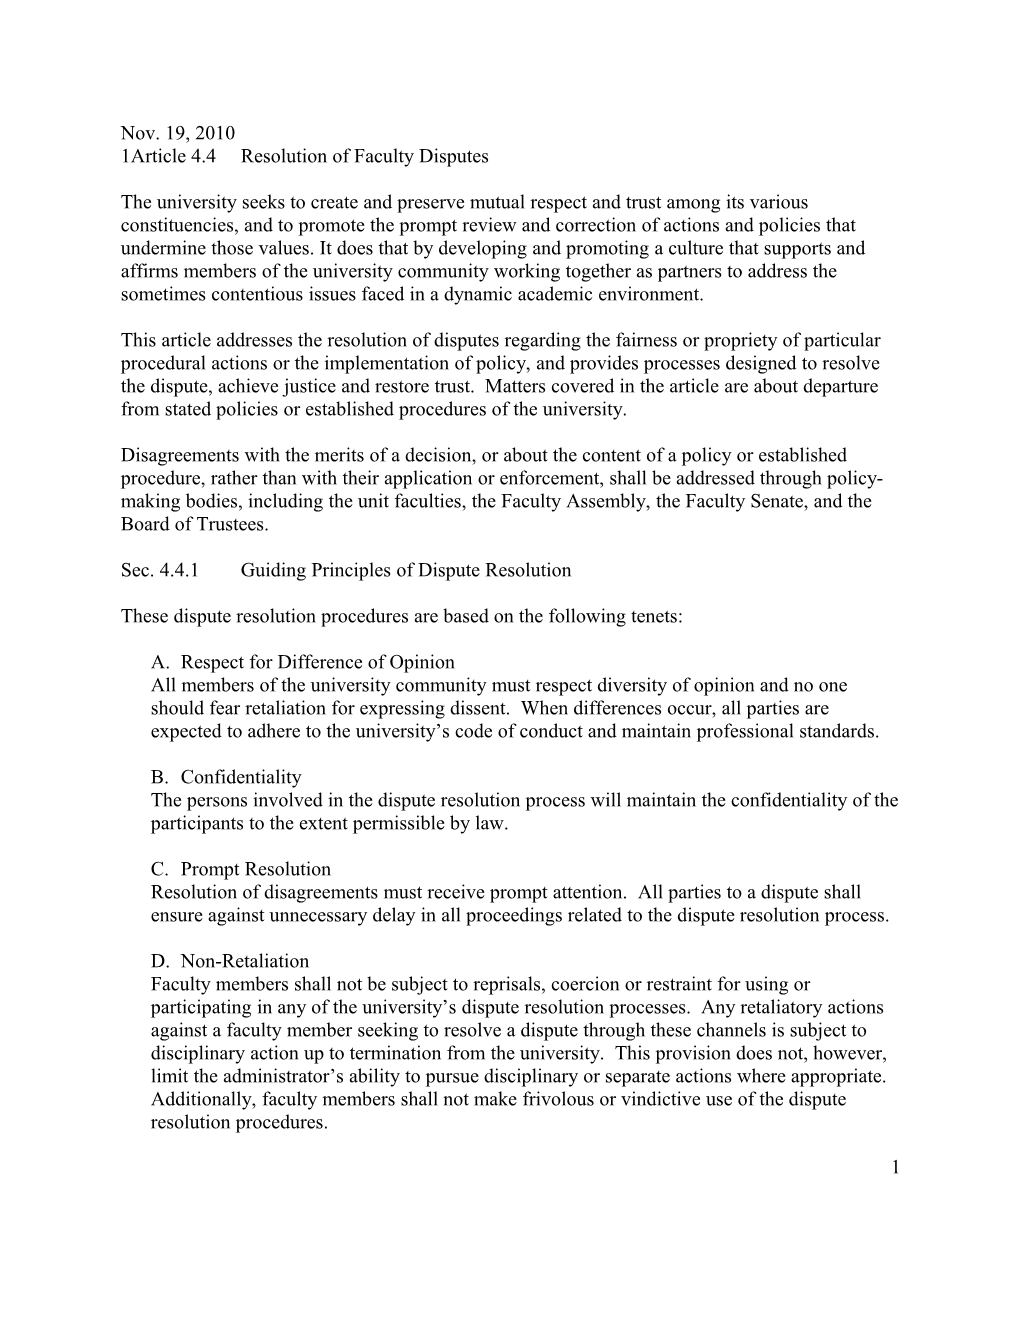 Article 4.4 Resolution of Faculty Disputes